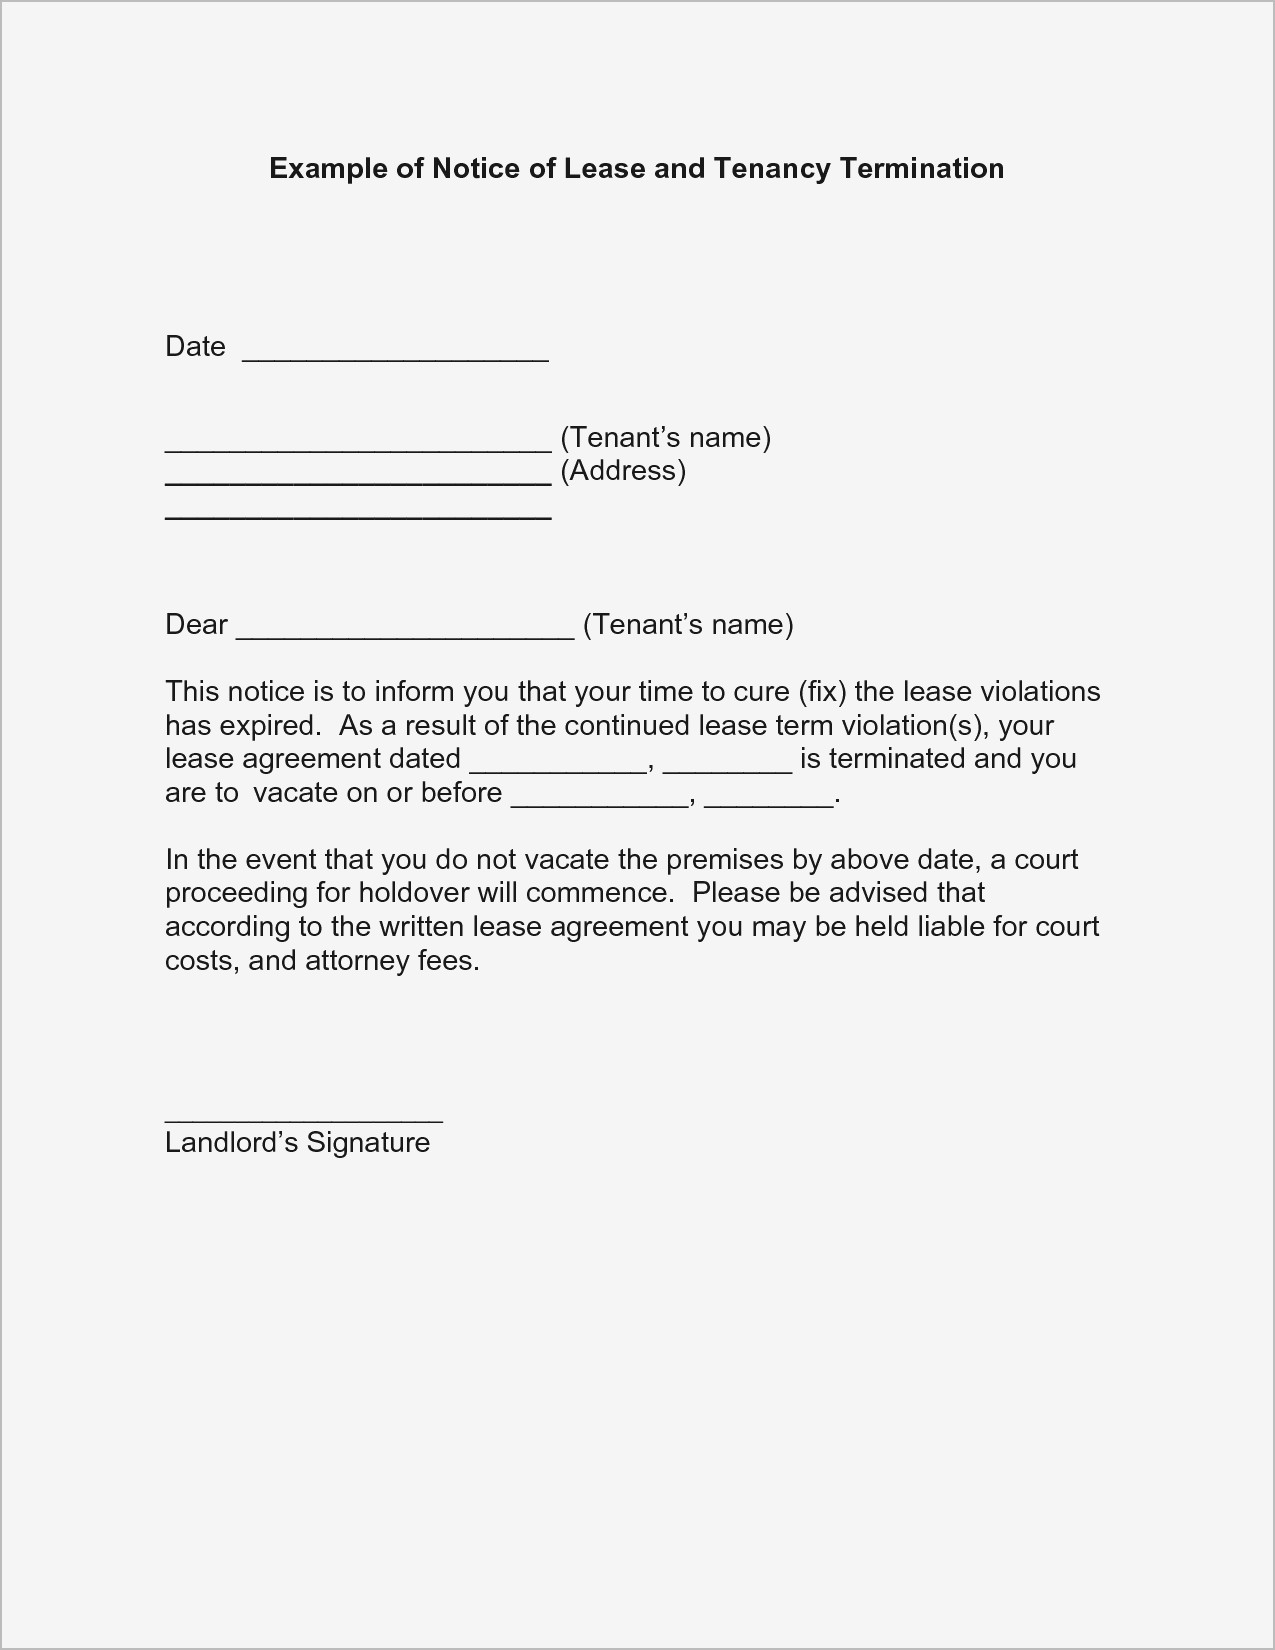 lease commencement letter template Collection-best photos of letter of lease violation warning notice of lease 20-p